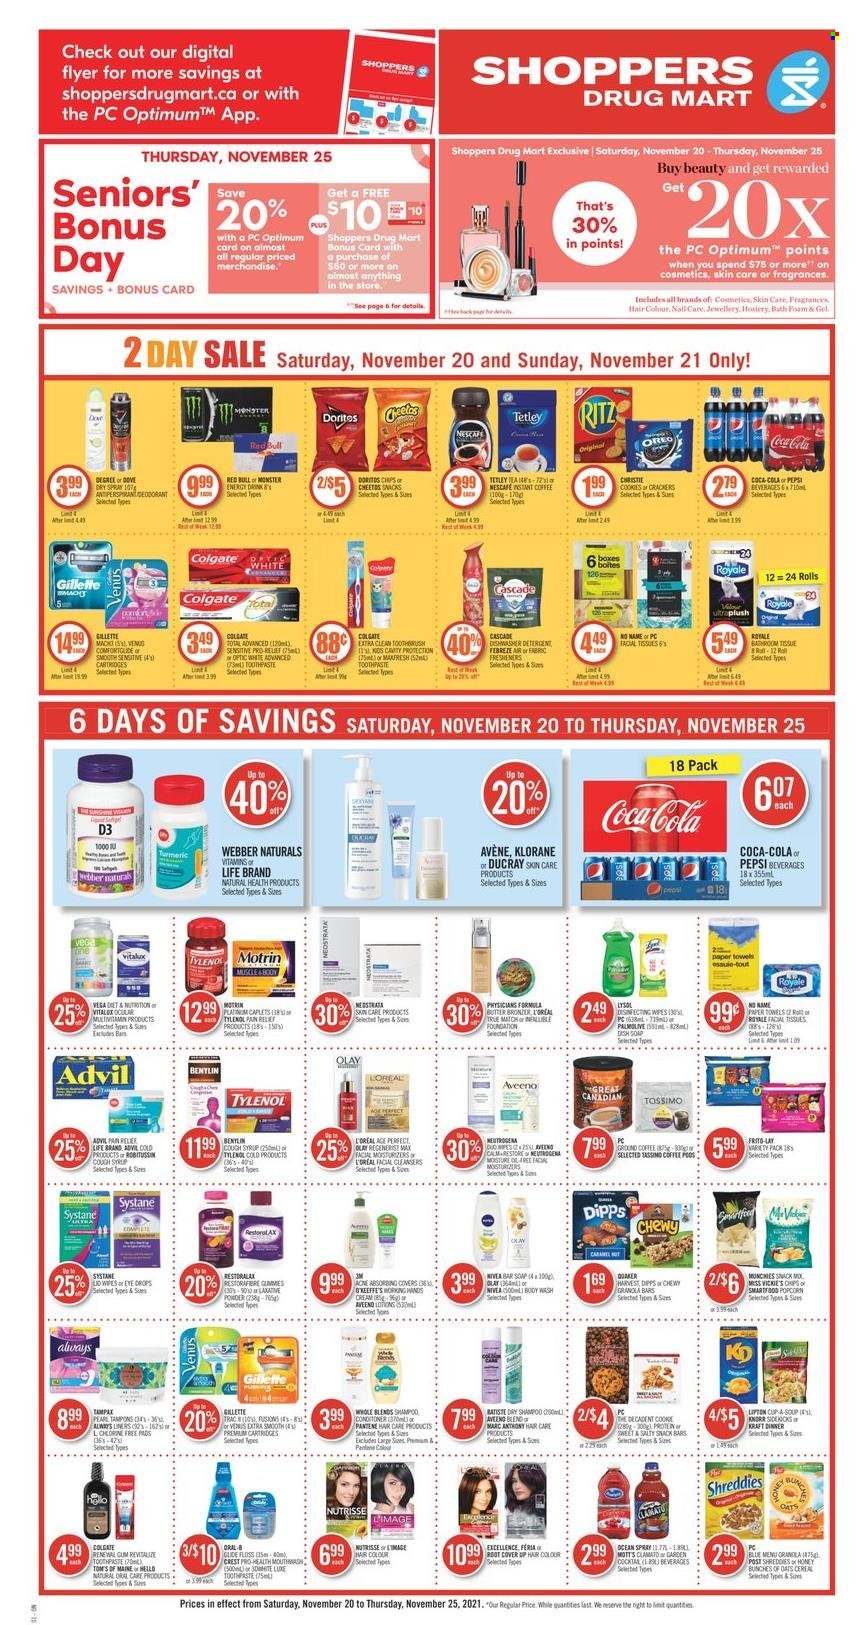 thumbnail - Shoppers Drug Mart Flyer - November 20, 2021 - November 25, 2021 - Sales products - snack, crackers, snack bar, Mott's, RITZ, Doritos, Cheetos, popcorn, Frito-Lay, soup, cereals, Ace, turmeric, Kraft®, syrup, Coca-Cola, Pepsi, Monster, Red Bull, coffee, ground coffee, wipes, Aveeno, tissues, kitchen towels, paper towels, Febreze, Lysol, Cascade, body wash, bath foam, Palmolive, soap bar, soap, toothpaste, Crest, tampons, facial tissues, L’Oréal, Olay, hair color, Klorane, Tylenol, Advil Rapid, vitamin D3, Benylin, Motrin, bra, Oreo, Colgate, Gillette, granola, Neutrogena, shampoo, Systane, Pantene, Nivea, Nescafé. Page 1.